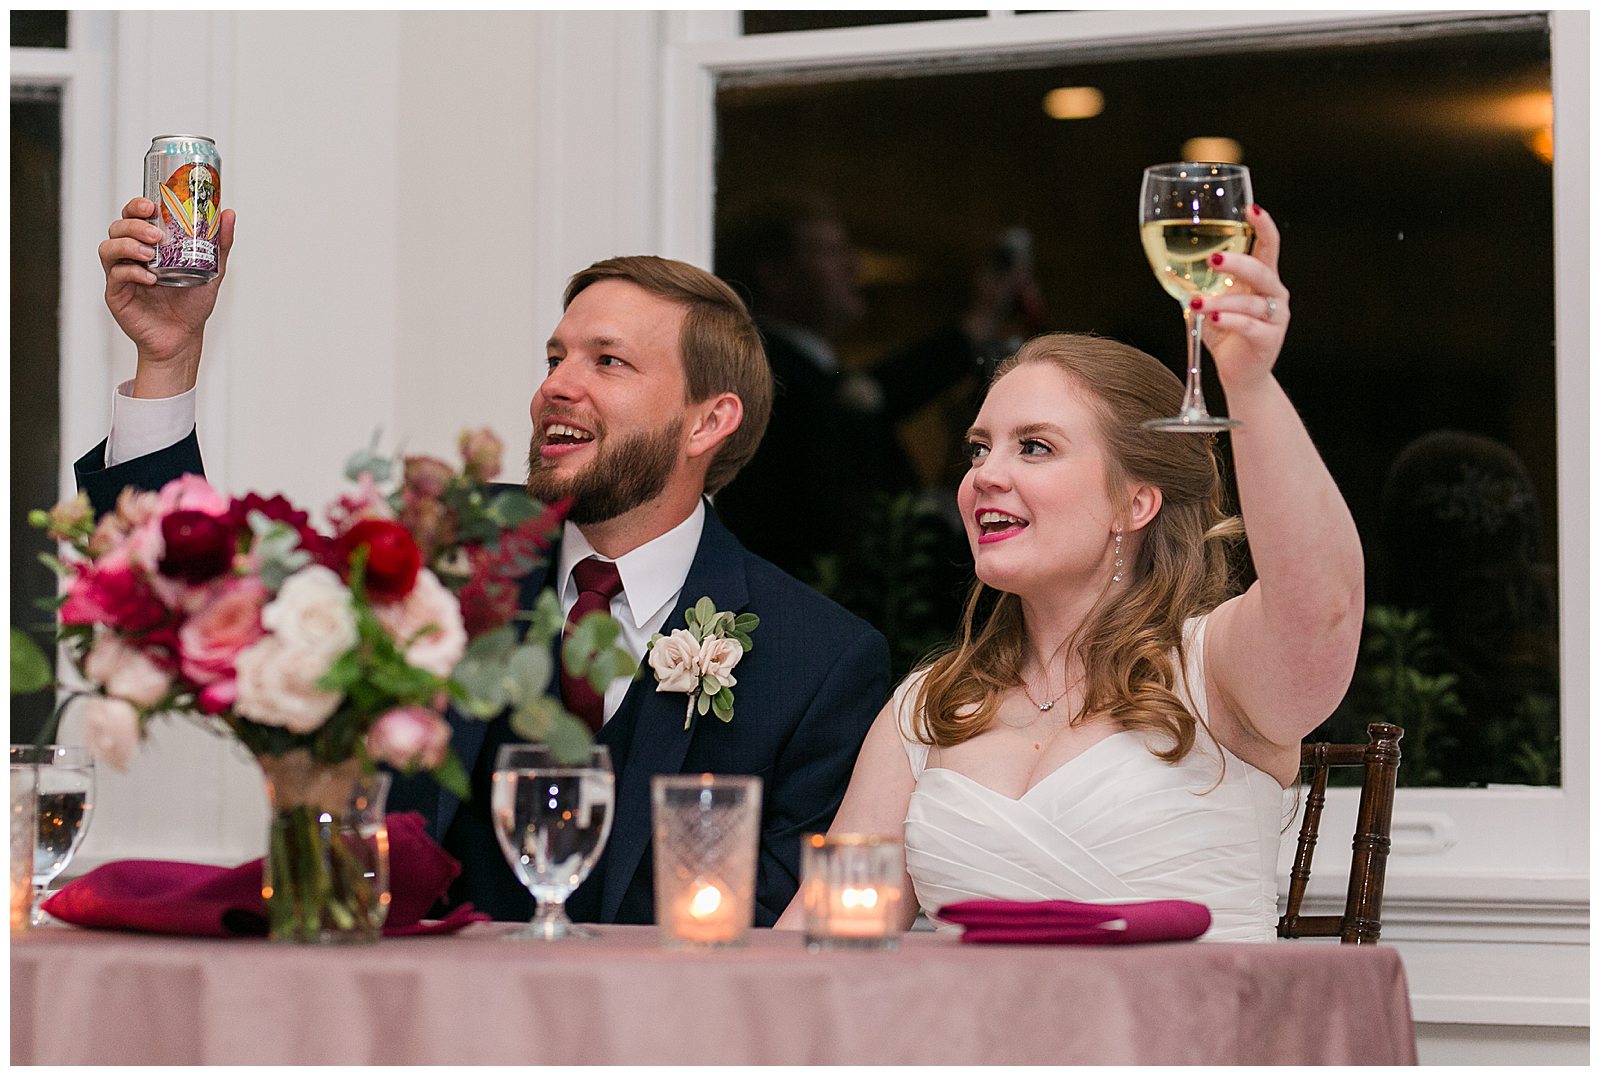 Bride and groom raise glasses for toast